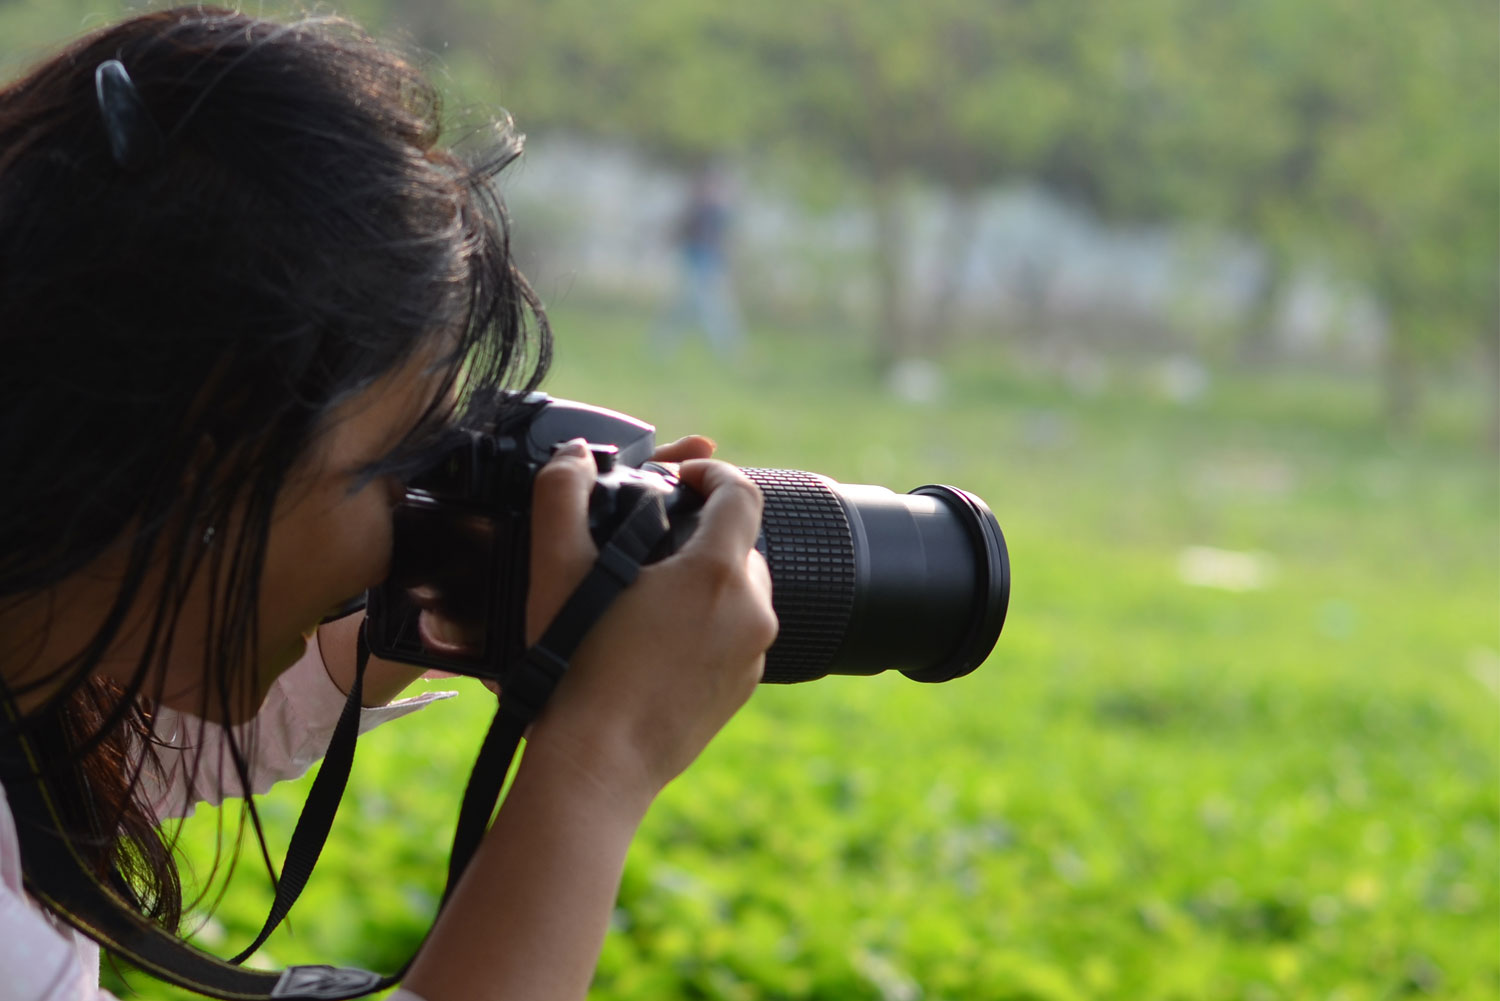 before-press-the-shutter-button - Photography Tips